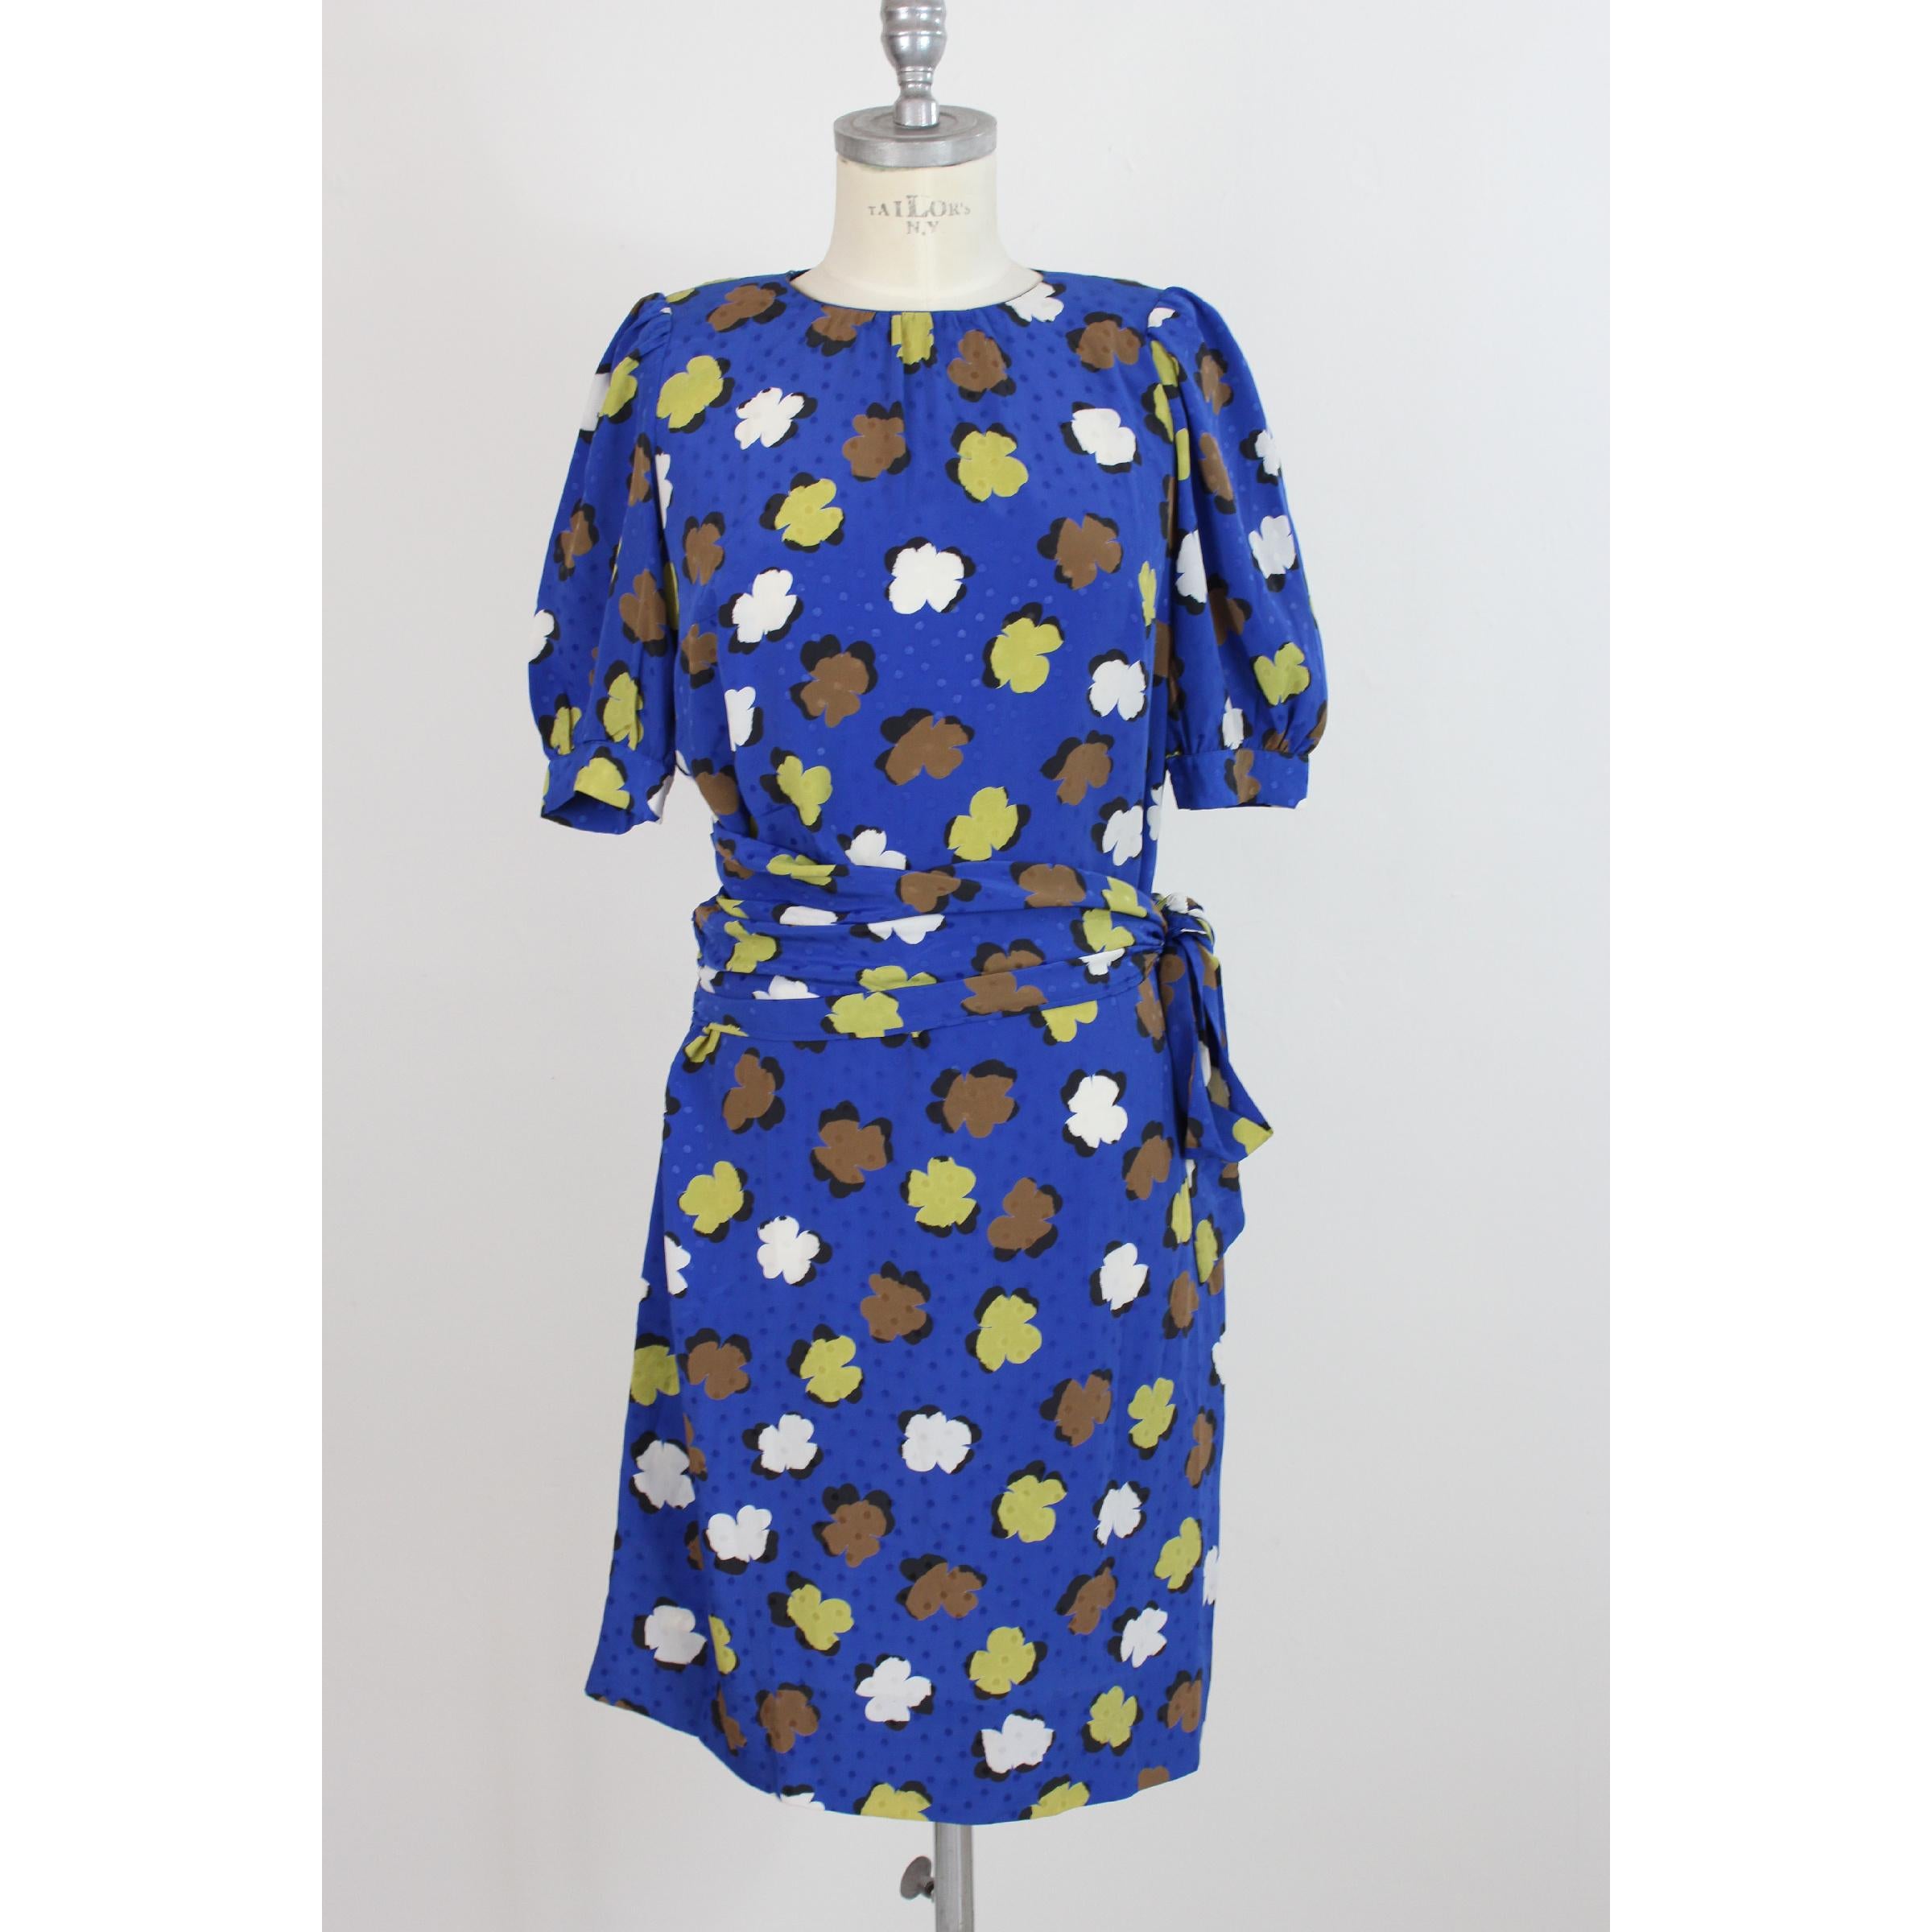 Yves Saint Laurent vintage dress for woman, blue color with colored flowers and tone-on-tone polka dots, 100% silk. Short balloon sleeve with a soft belt at the waist. Made in Italy. Excellent vintage conditions.
Size: 42 It 8 Us 10 Uk
Shoulder: 42